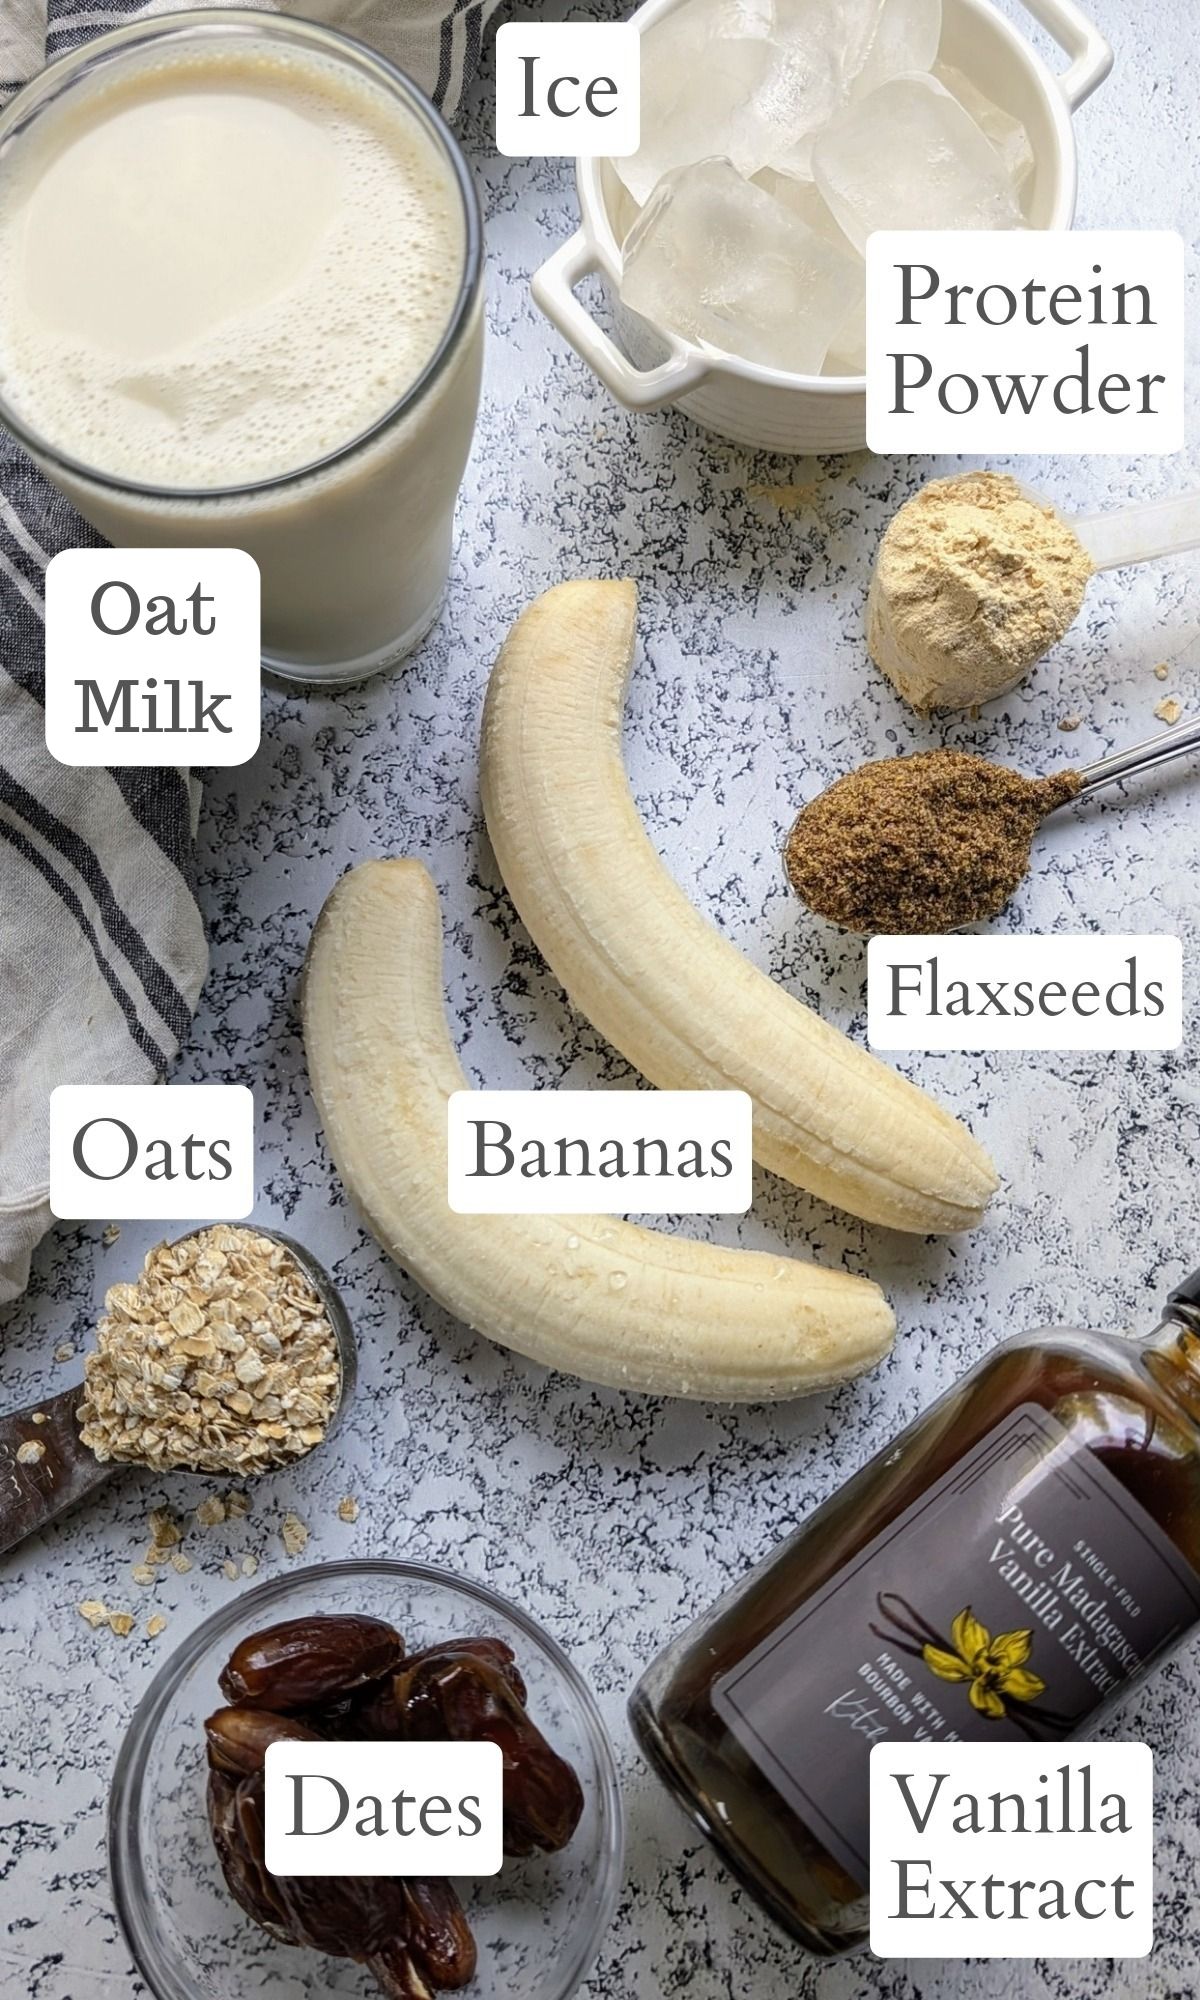 ingredients laid out for this oat milk smoothie with banana vanilla extract oats flaxseeds and plant-based milk and dates for sweetness.